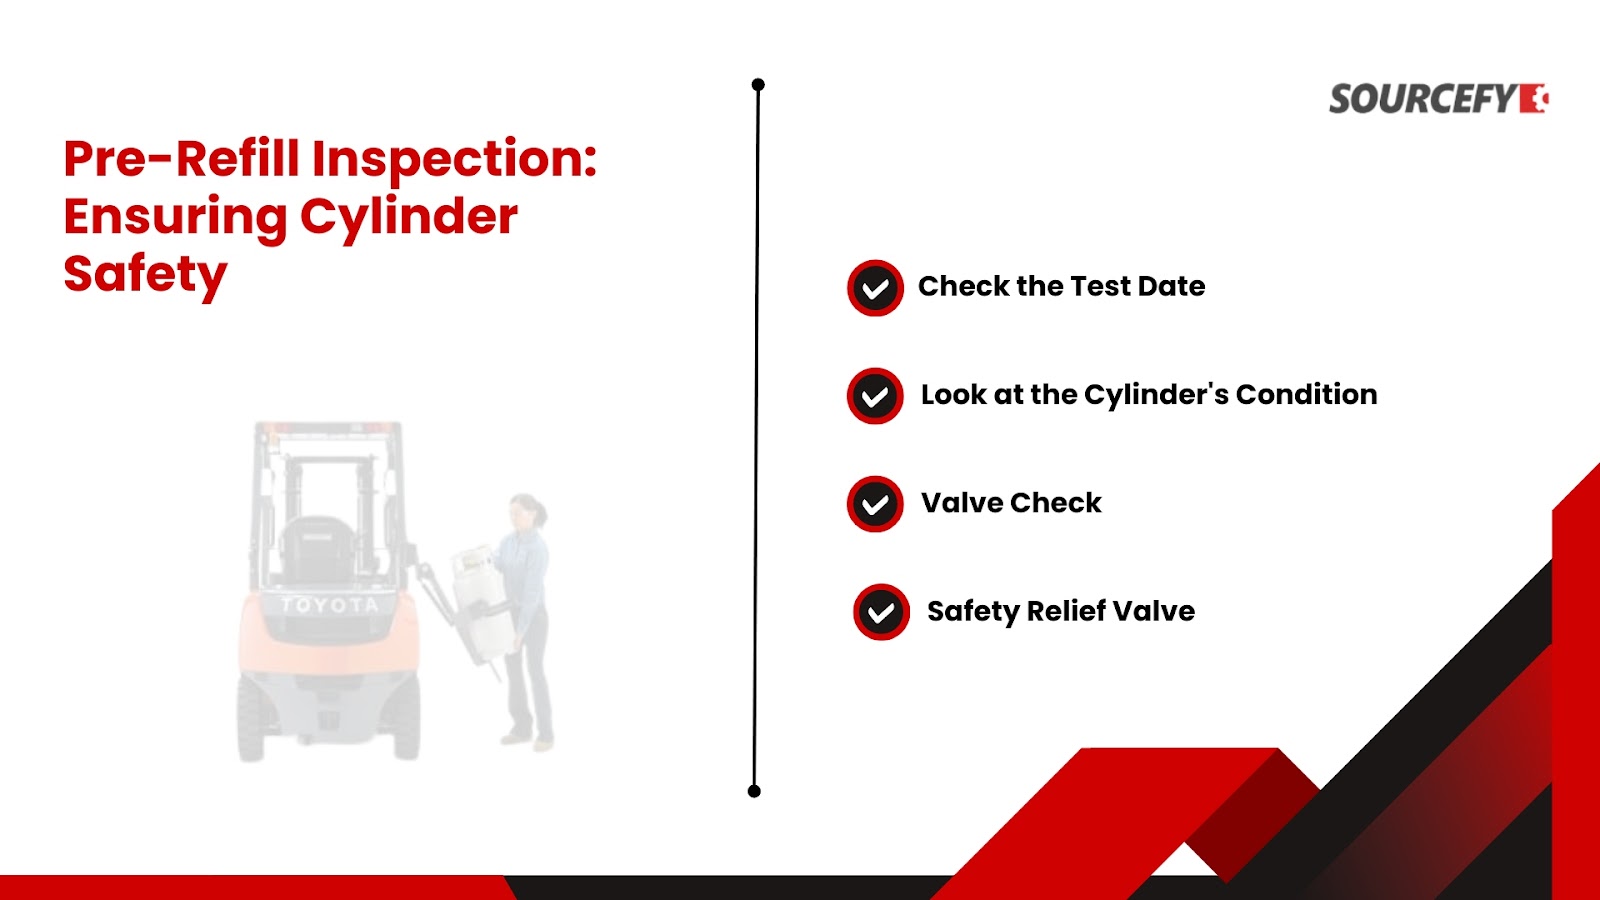 Pre-Refill Inspection: Ensuring Cylinder Safety